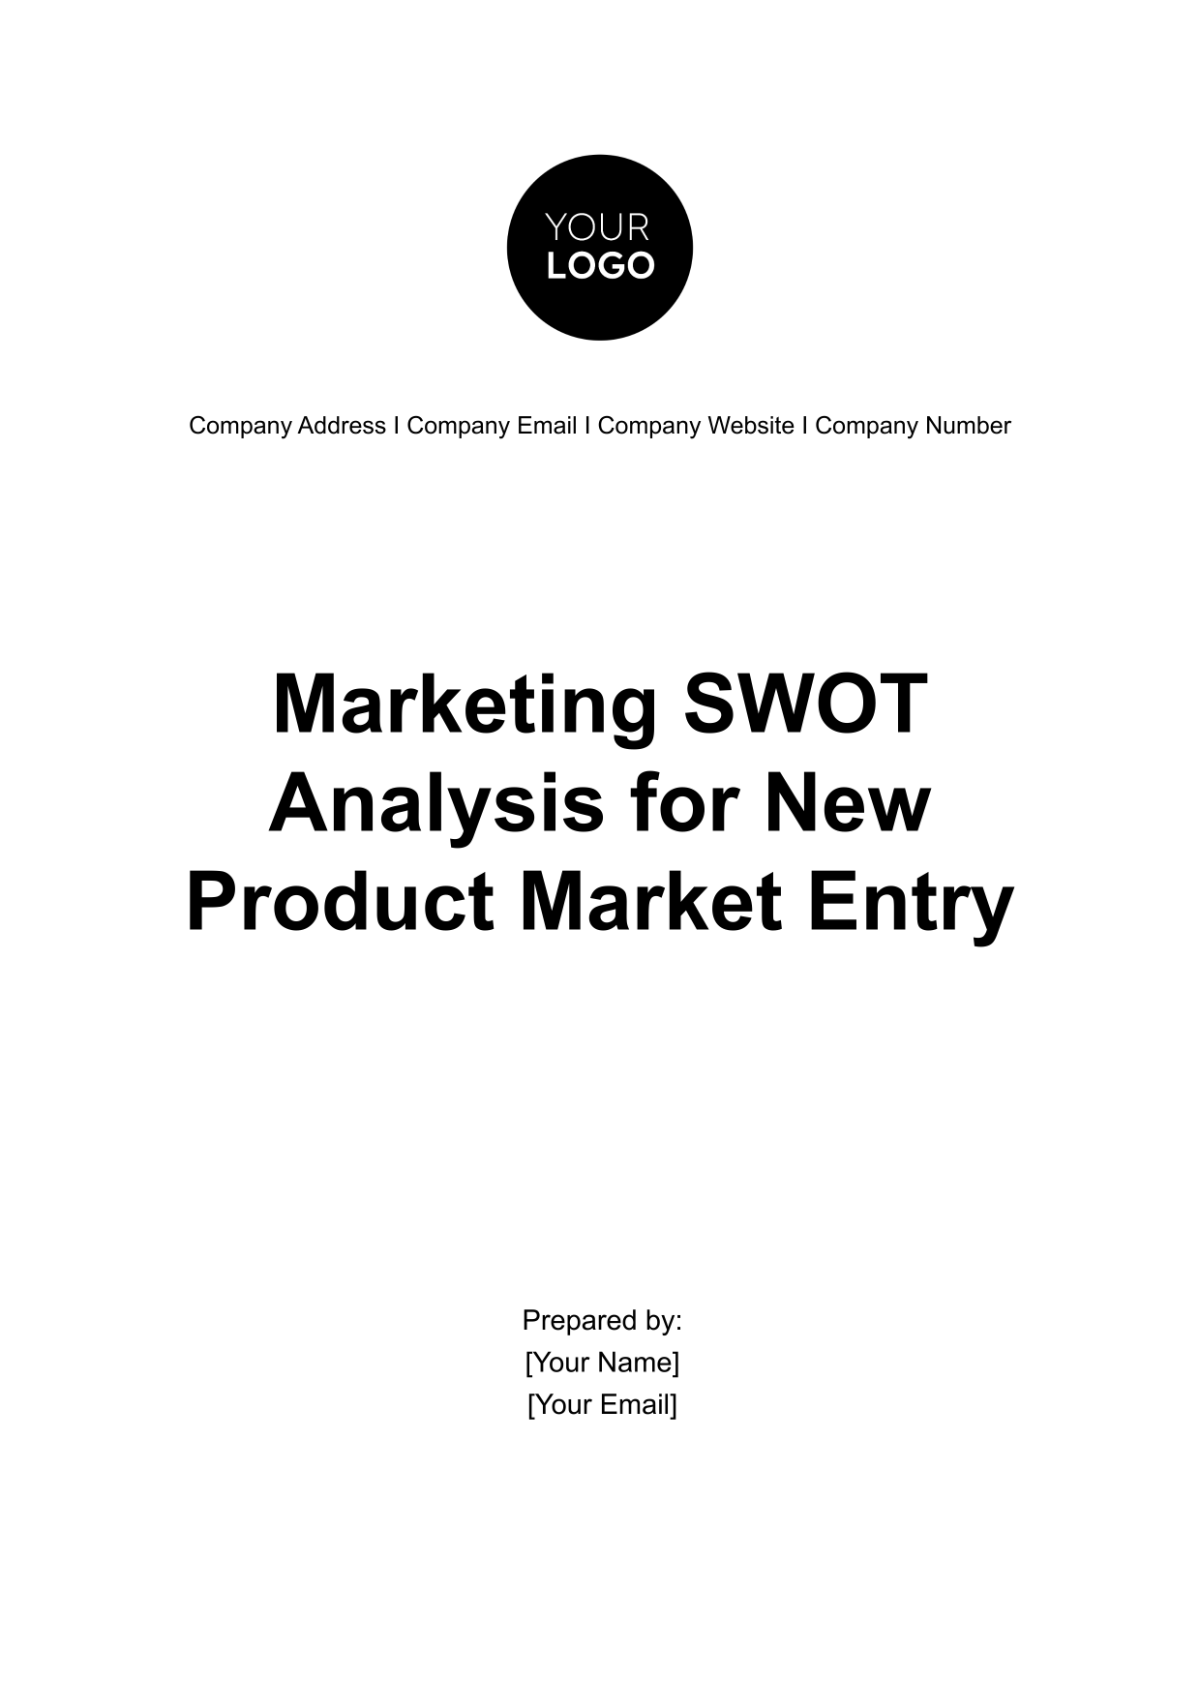 Free Marketing SWOT Analysis for New Product Market Entry Template